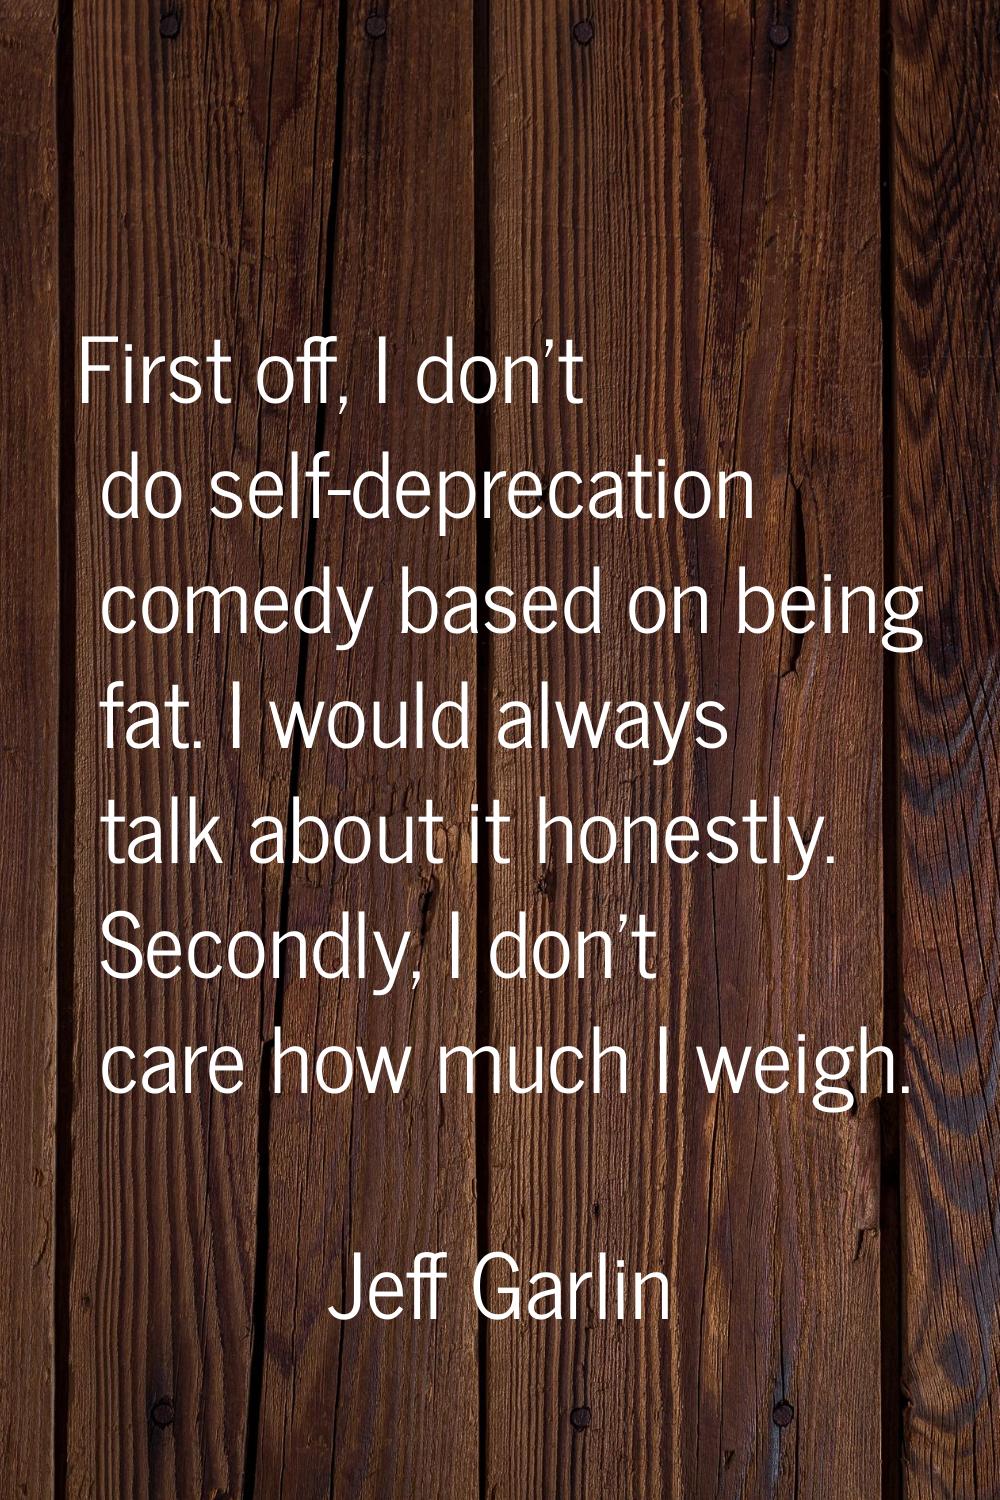 First off, I don't do self-deprecation comedy based on being fat. I would always talk about it hone